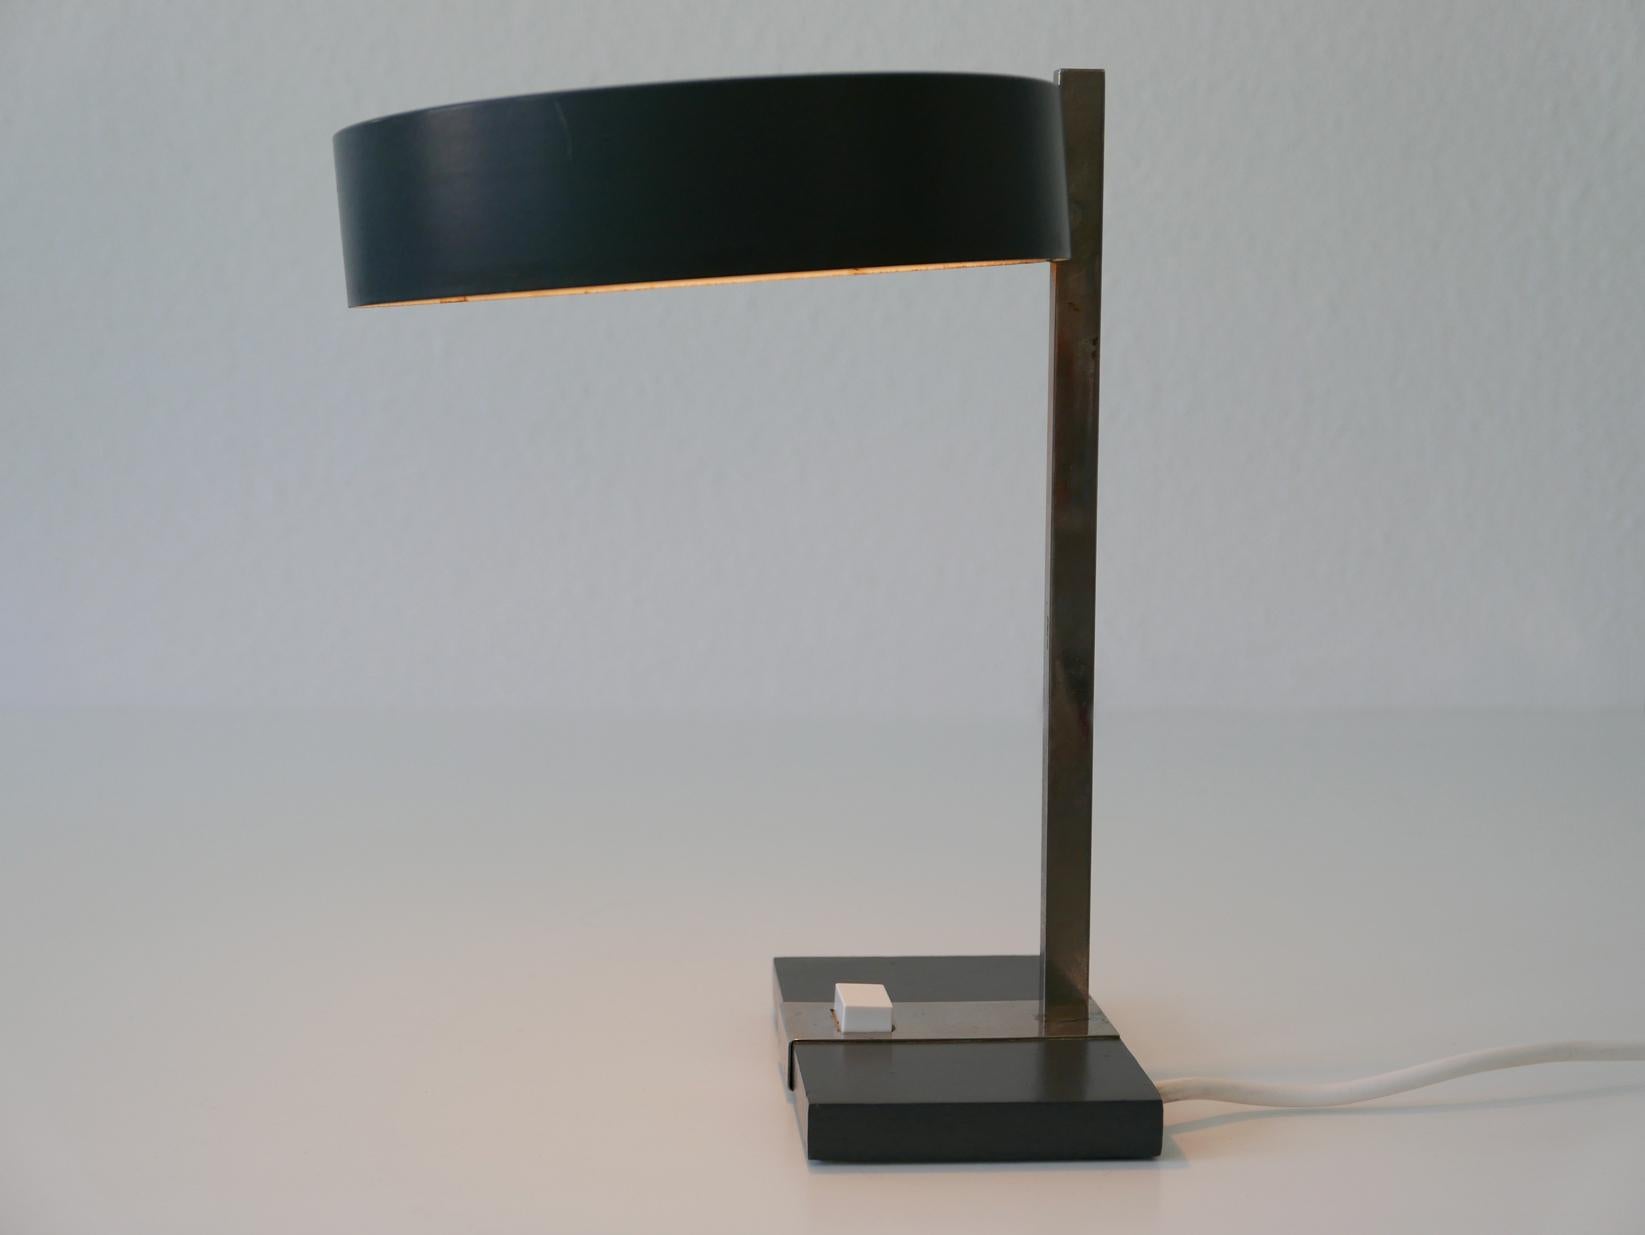 Lacquered Elegant Mid-Century Modern Table Lamp or Desk Light by Hillebrand, 1960s Germany For Sale